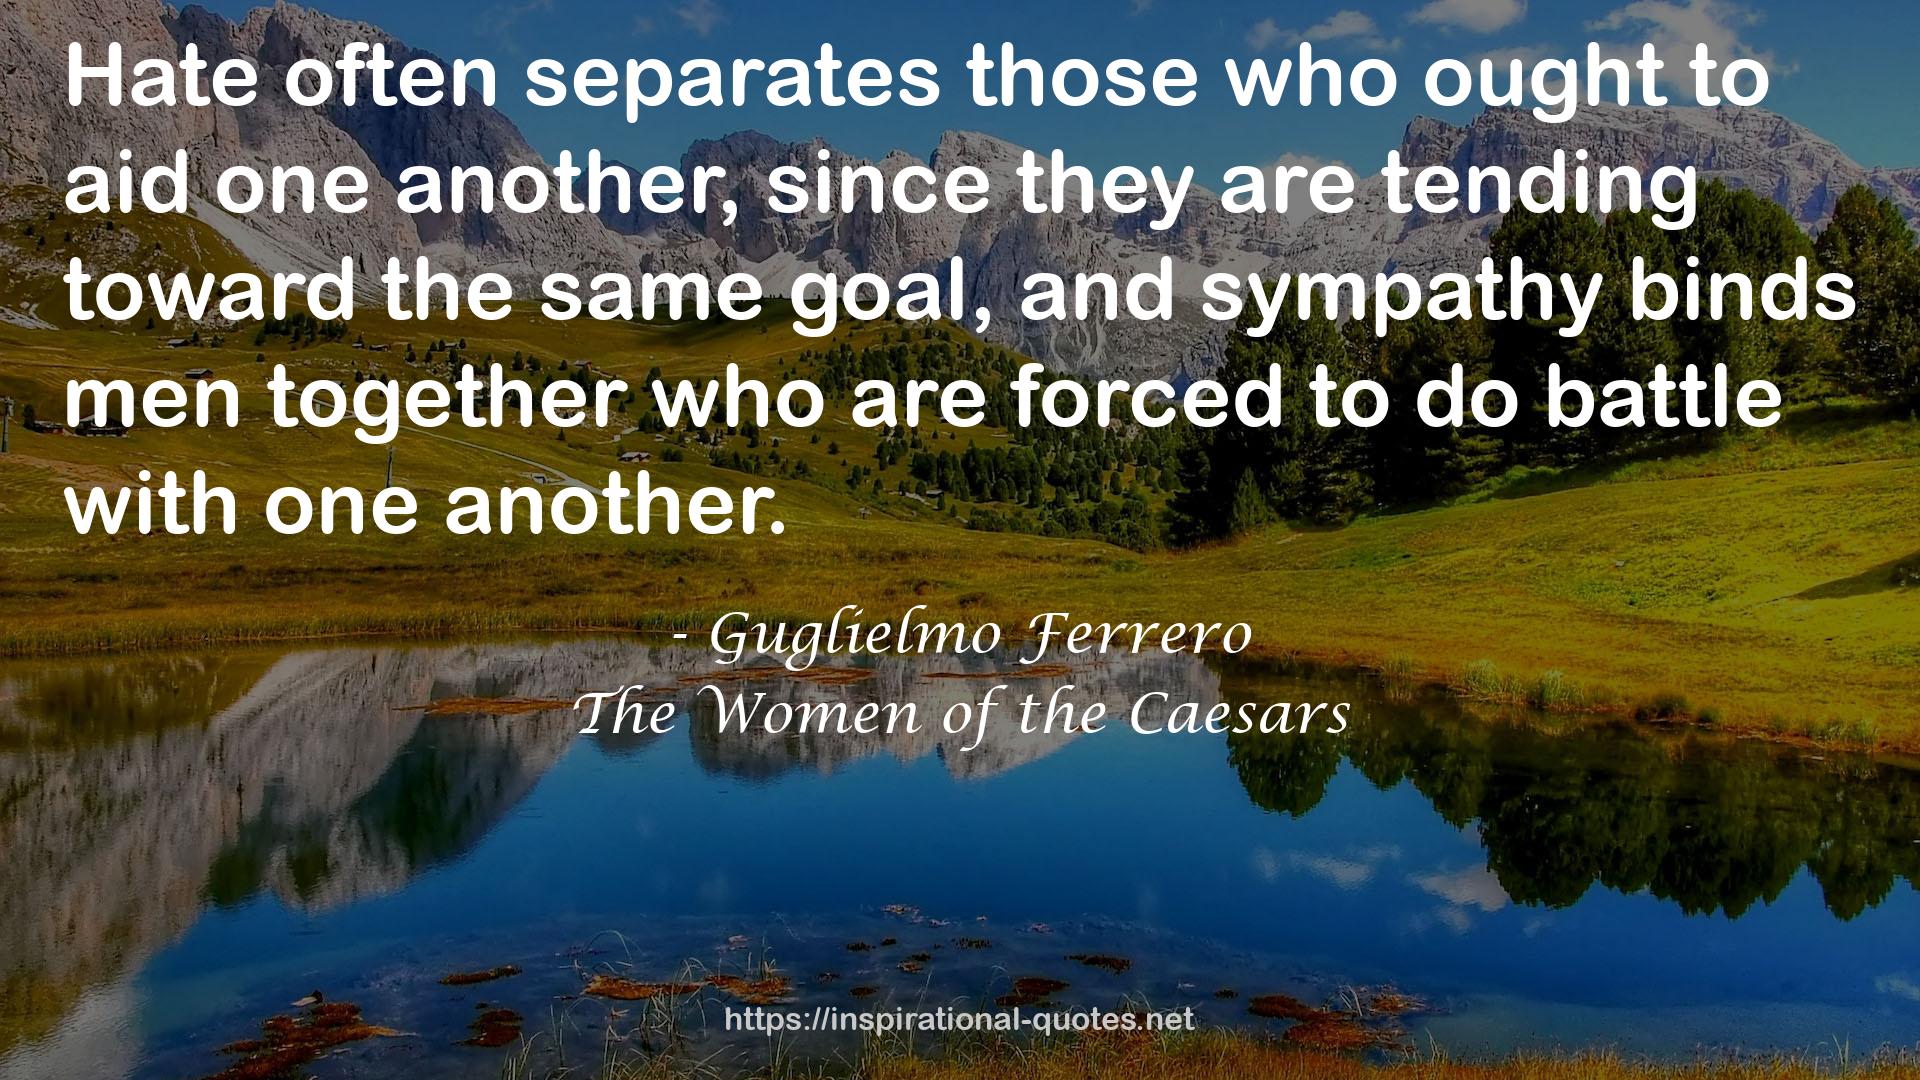 The Women of the Caesars QUOTES